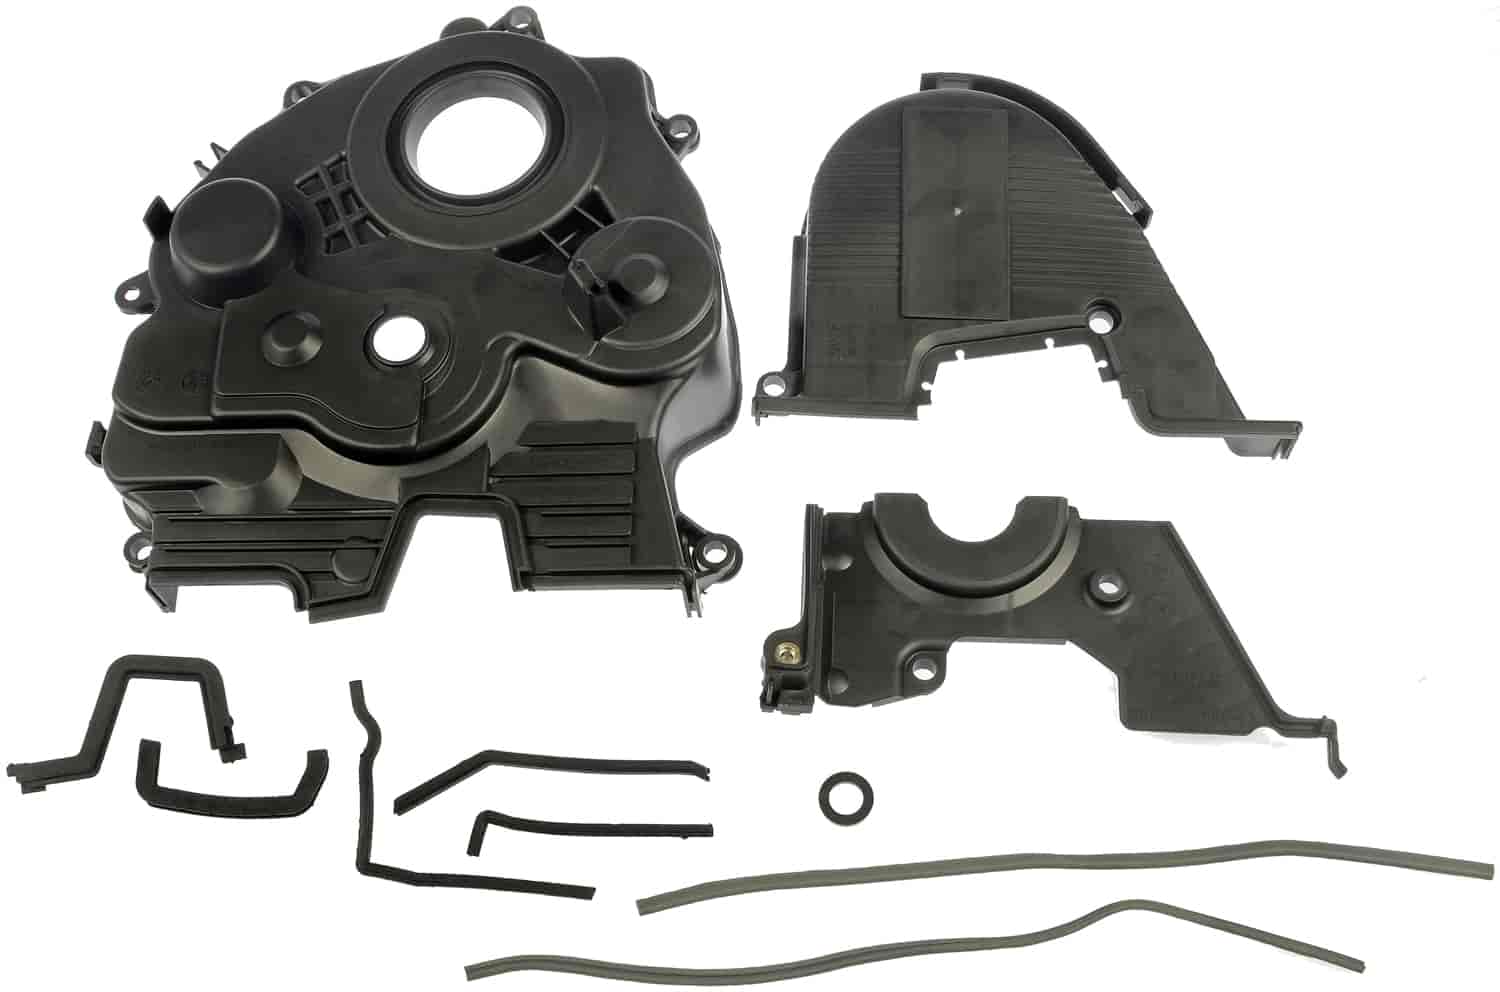 Timing Cover 1995-97 Accord, Odyssey 4 cyl 2.2L Plastic